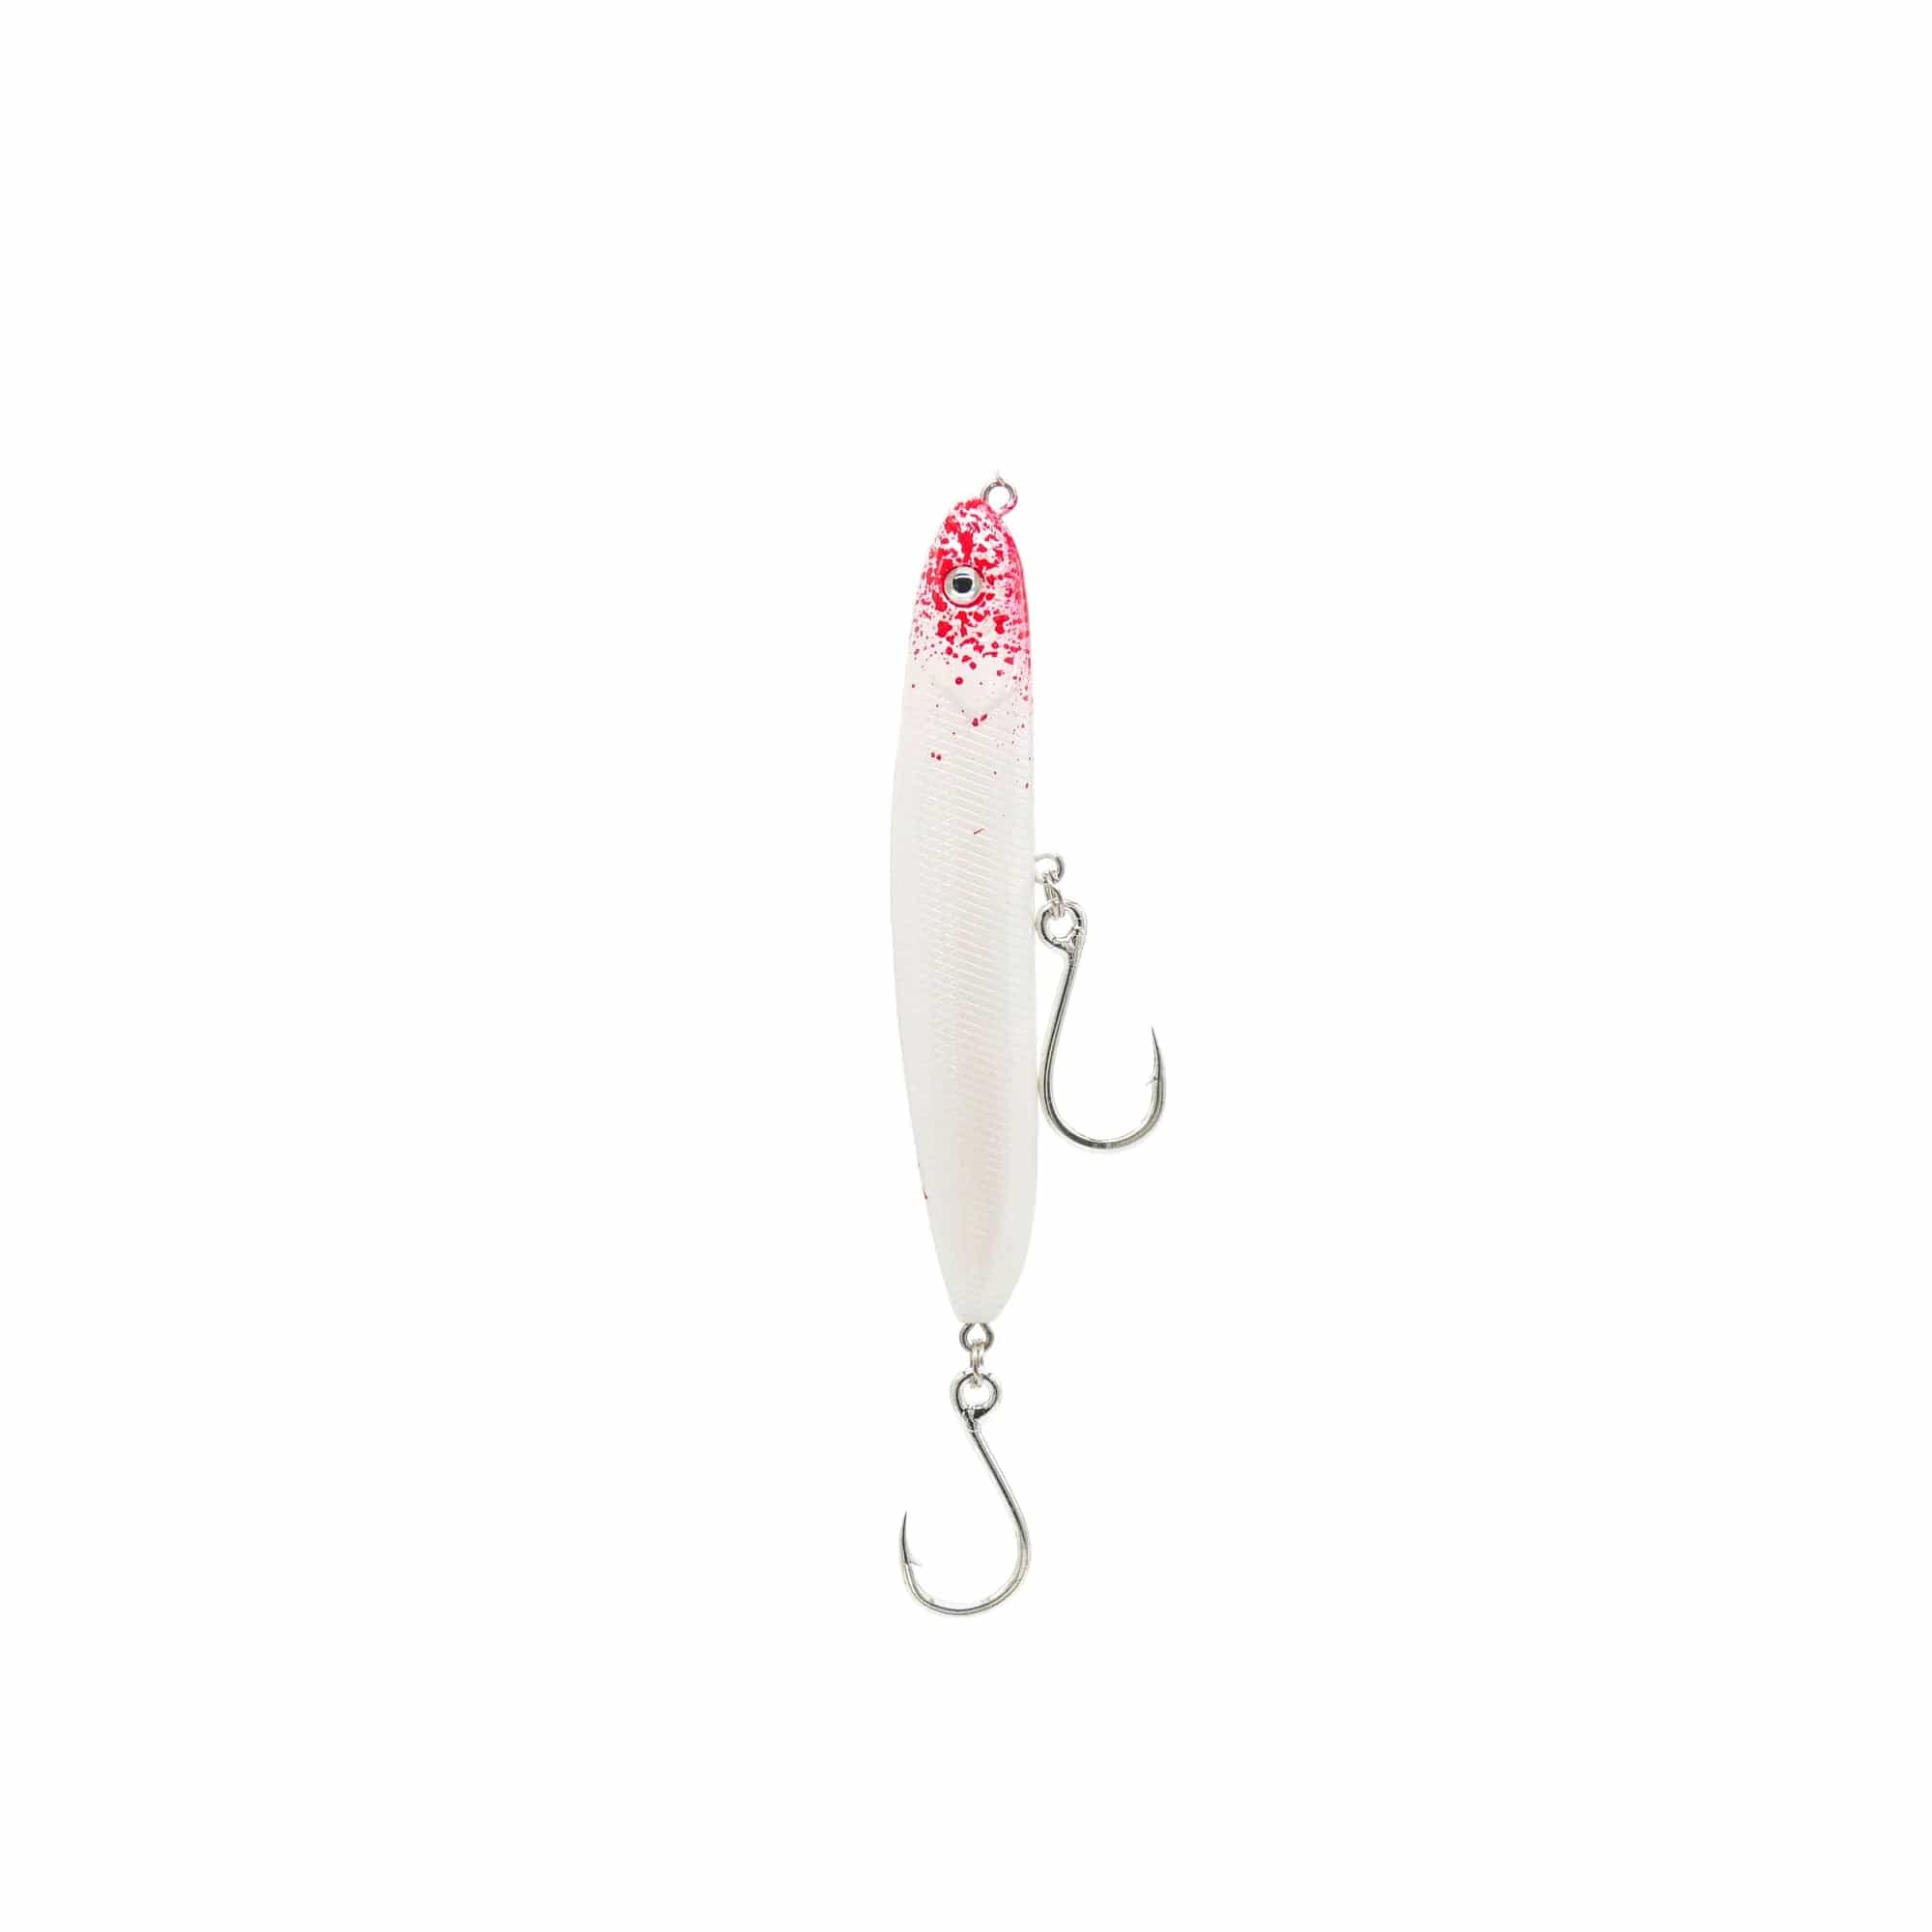 G-Tree Fishing Hard Lures Baits, Saltwater Popper Offshore Big Game Top Water Tuna Lures Heavy Duty Hard Lures Baits